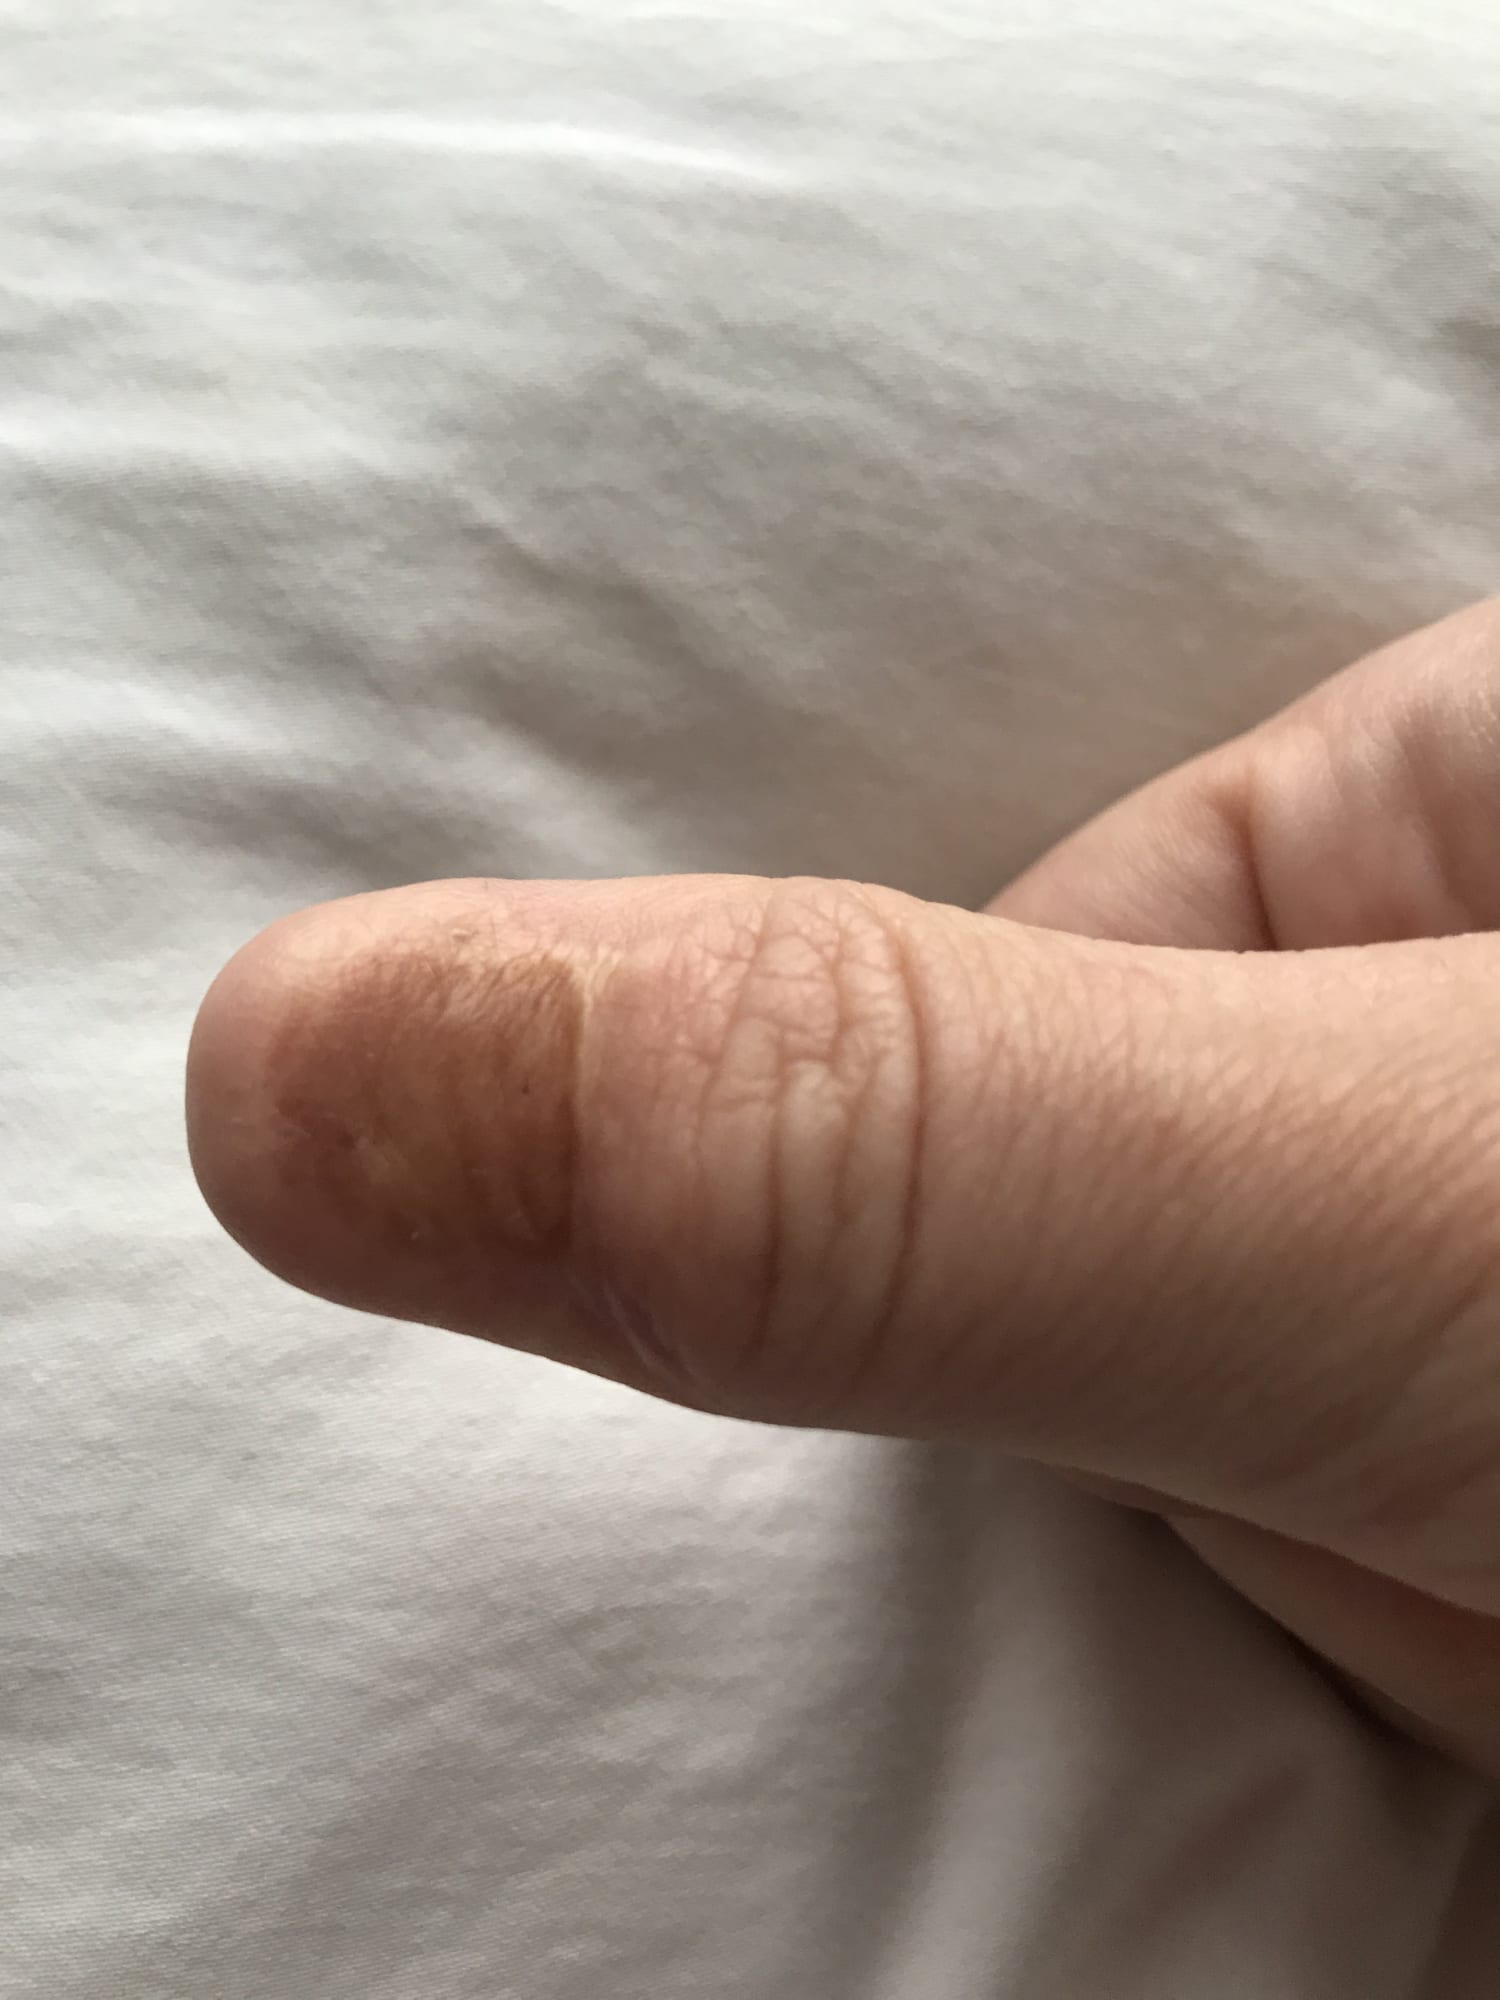 What does nail melanoma look like? Skin cancer can hide as line on nail